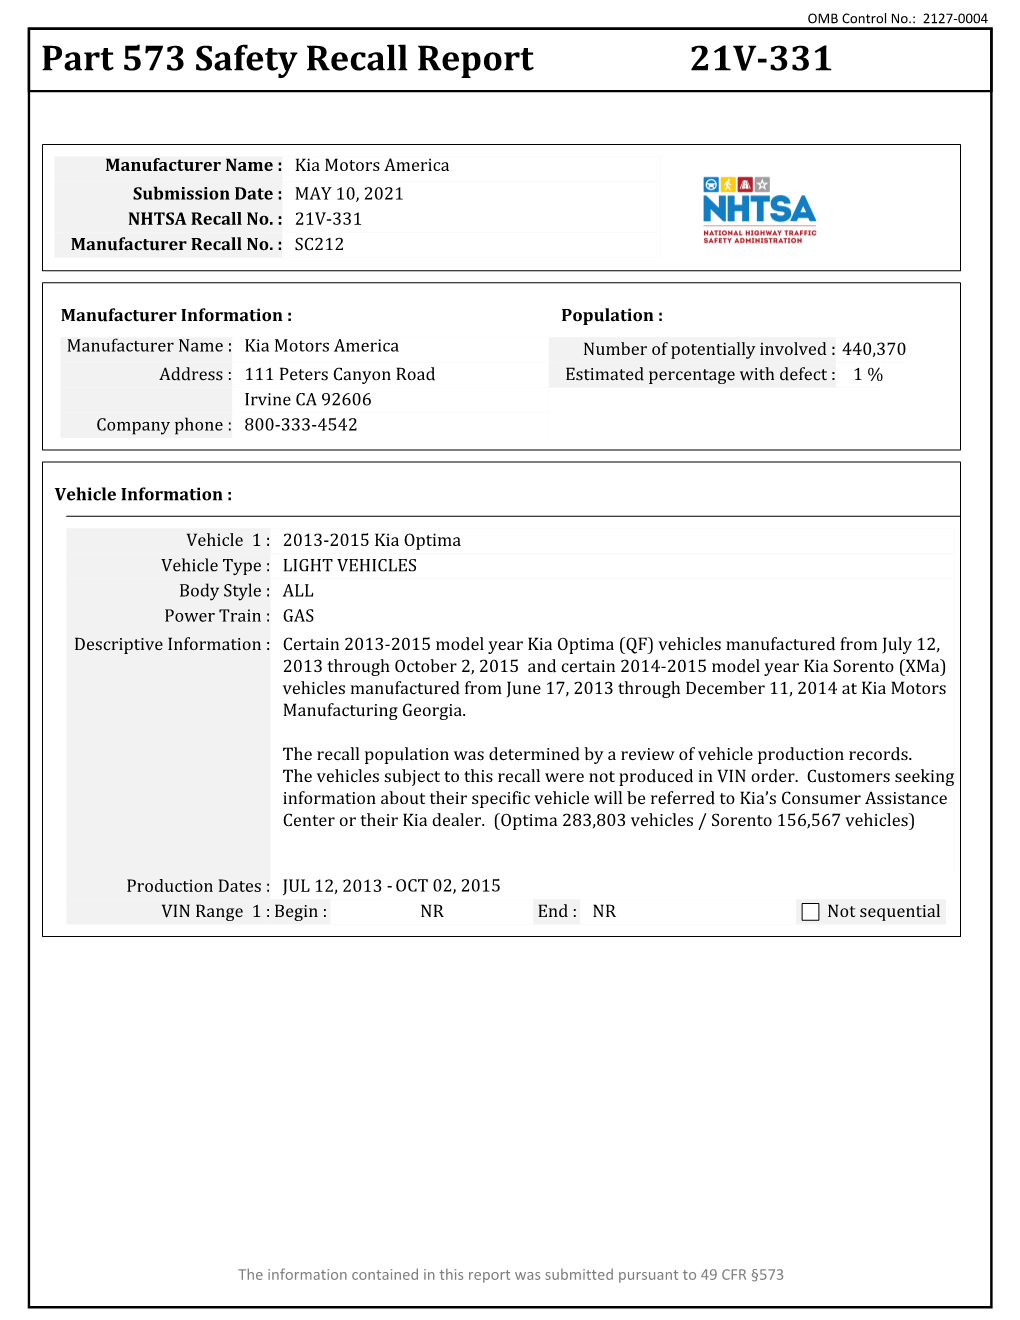 Part 573 Safety Recall Report 21V-331